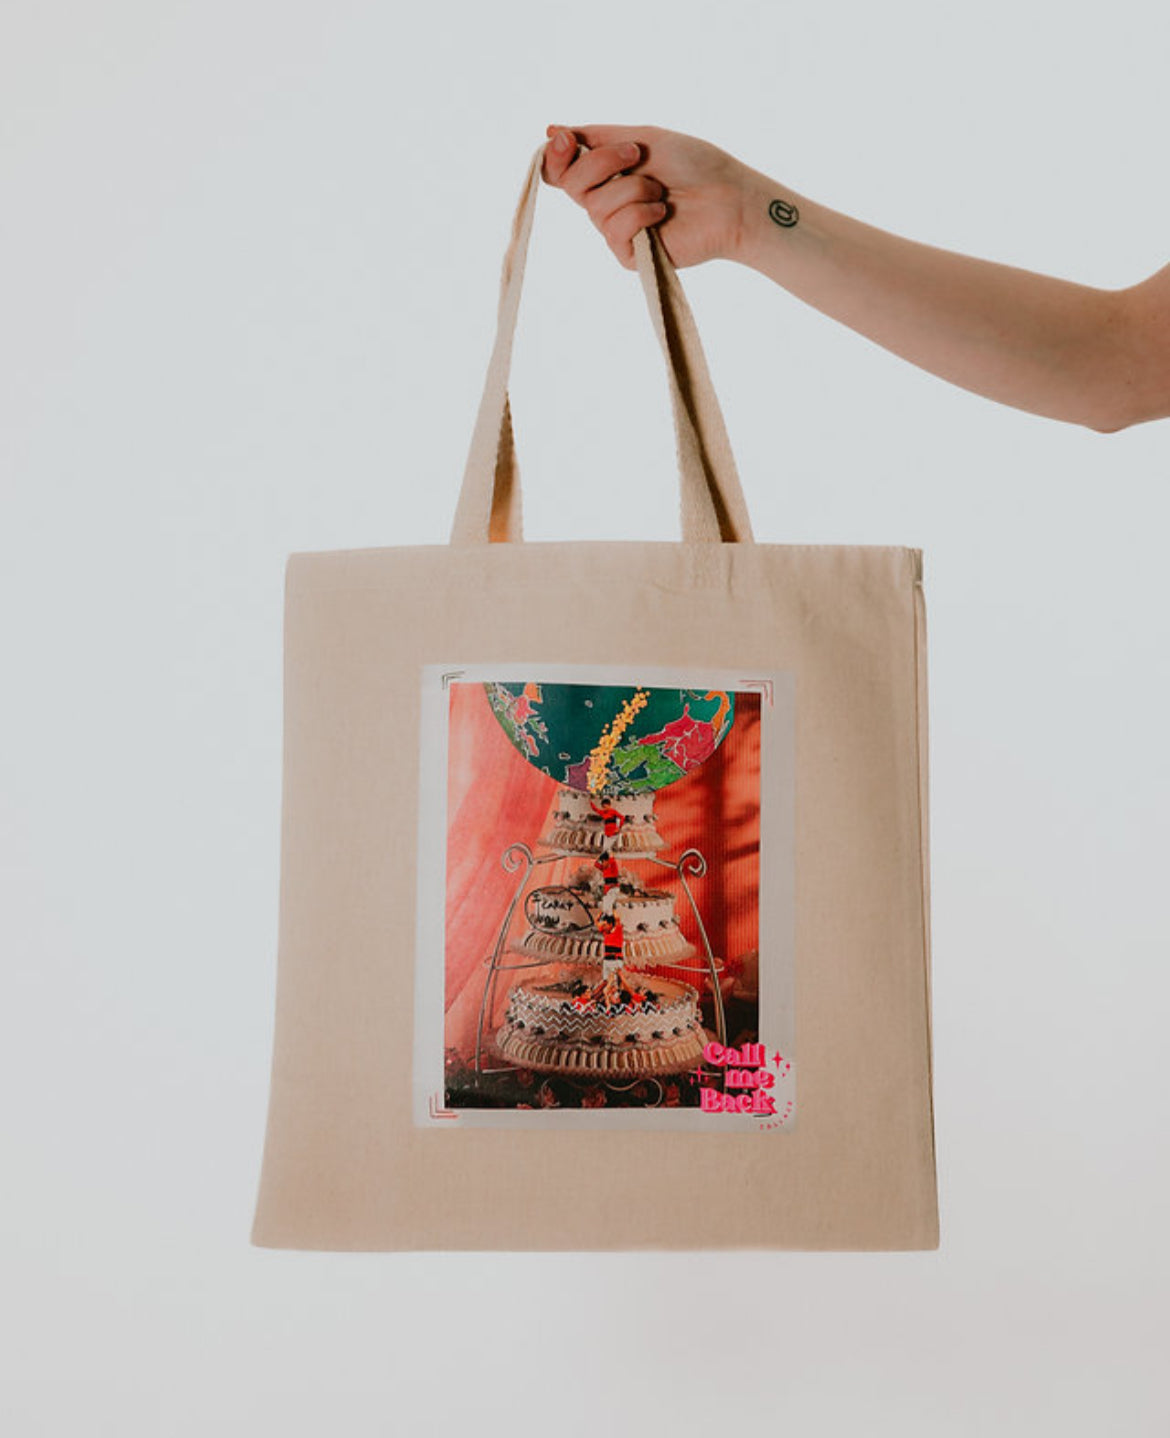 I Carry You Tote Bag | Call Me Back Collage